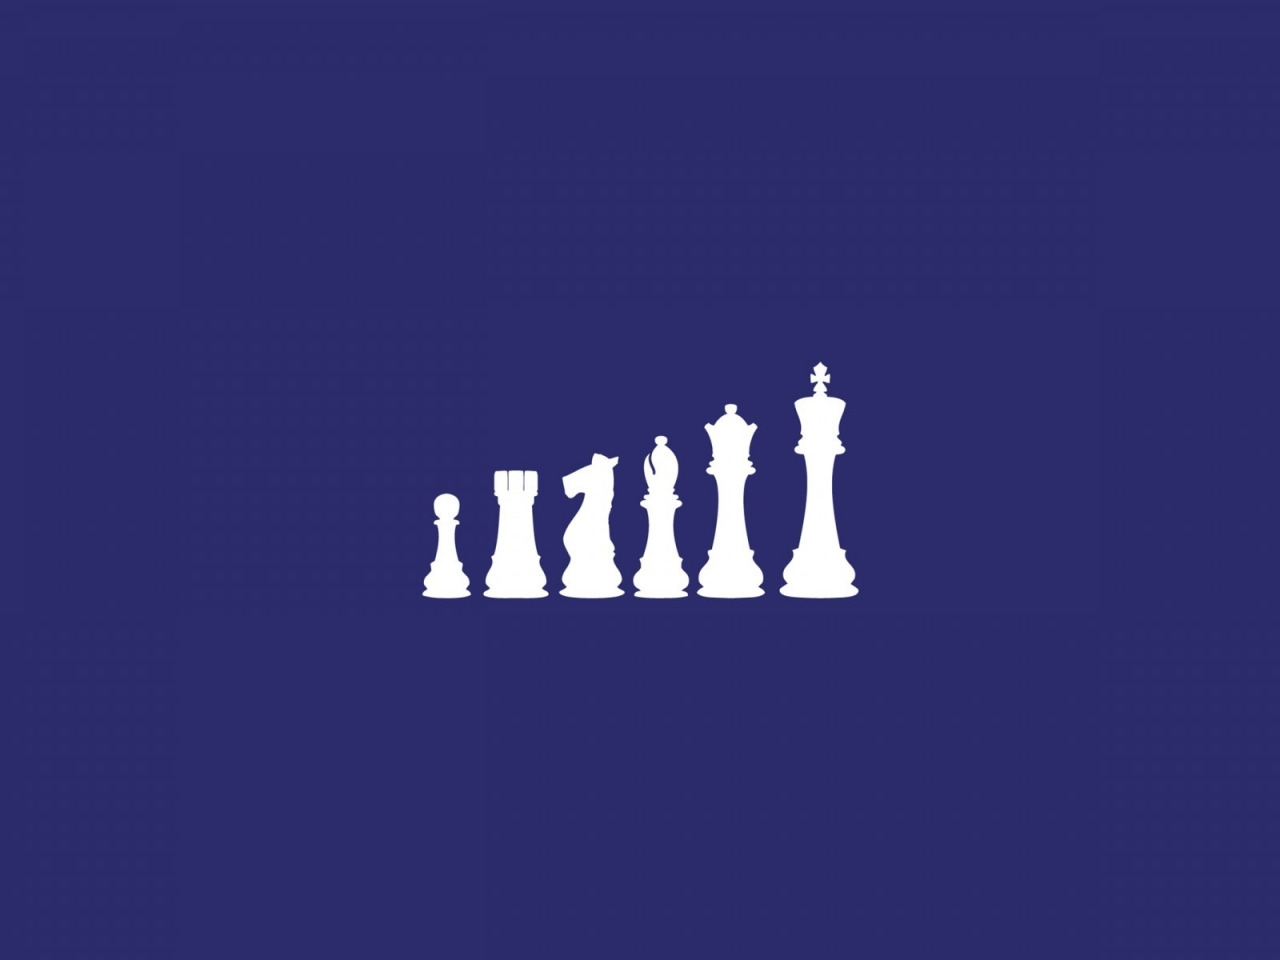 Chess Figures for 1280 x 960 resolution